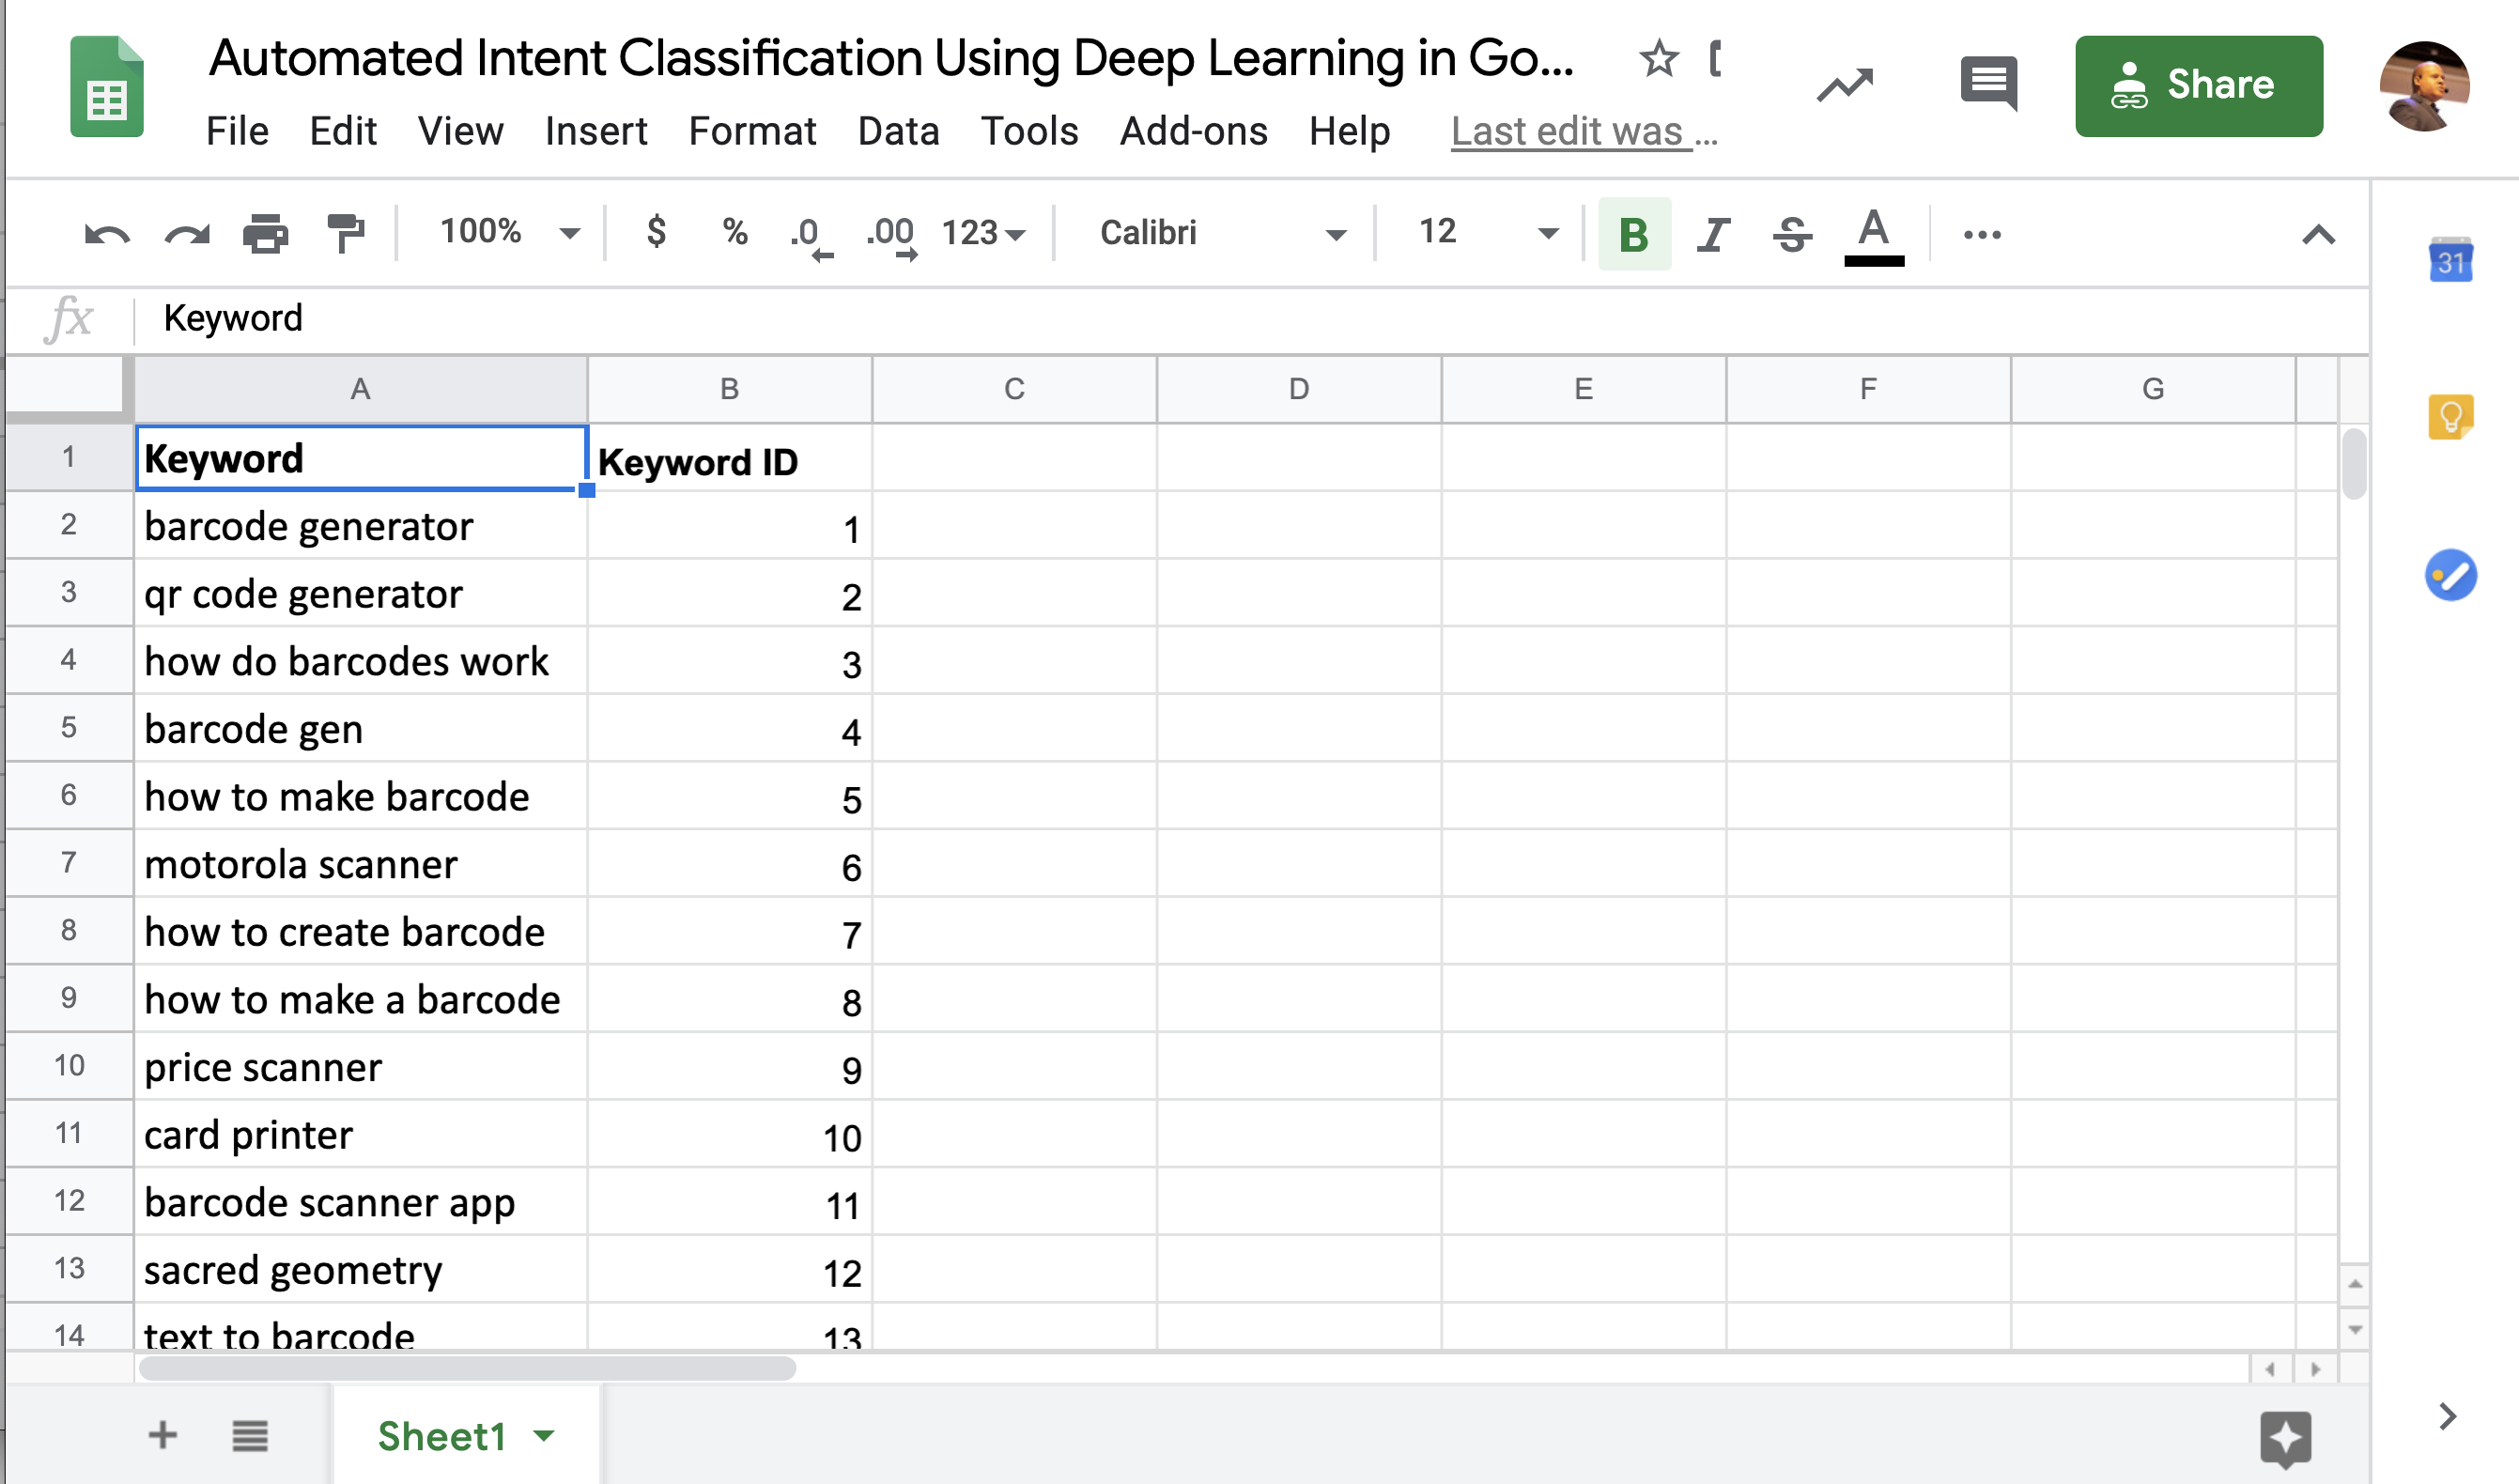 Automated Intent Classification Using Deep Learning in Google Sheets